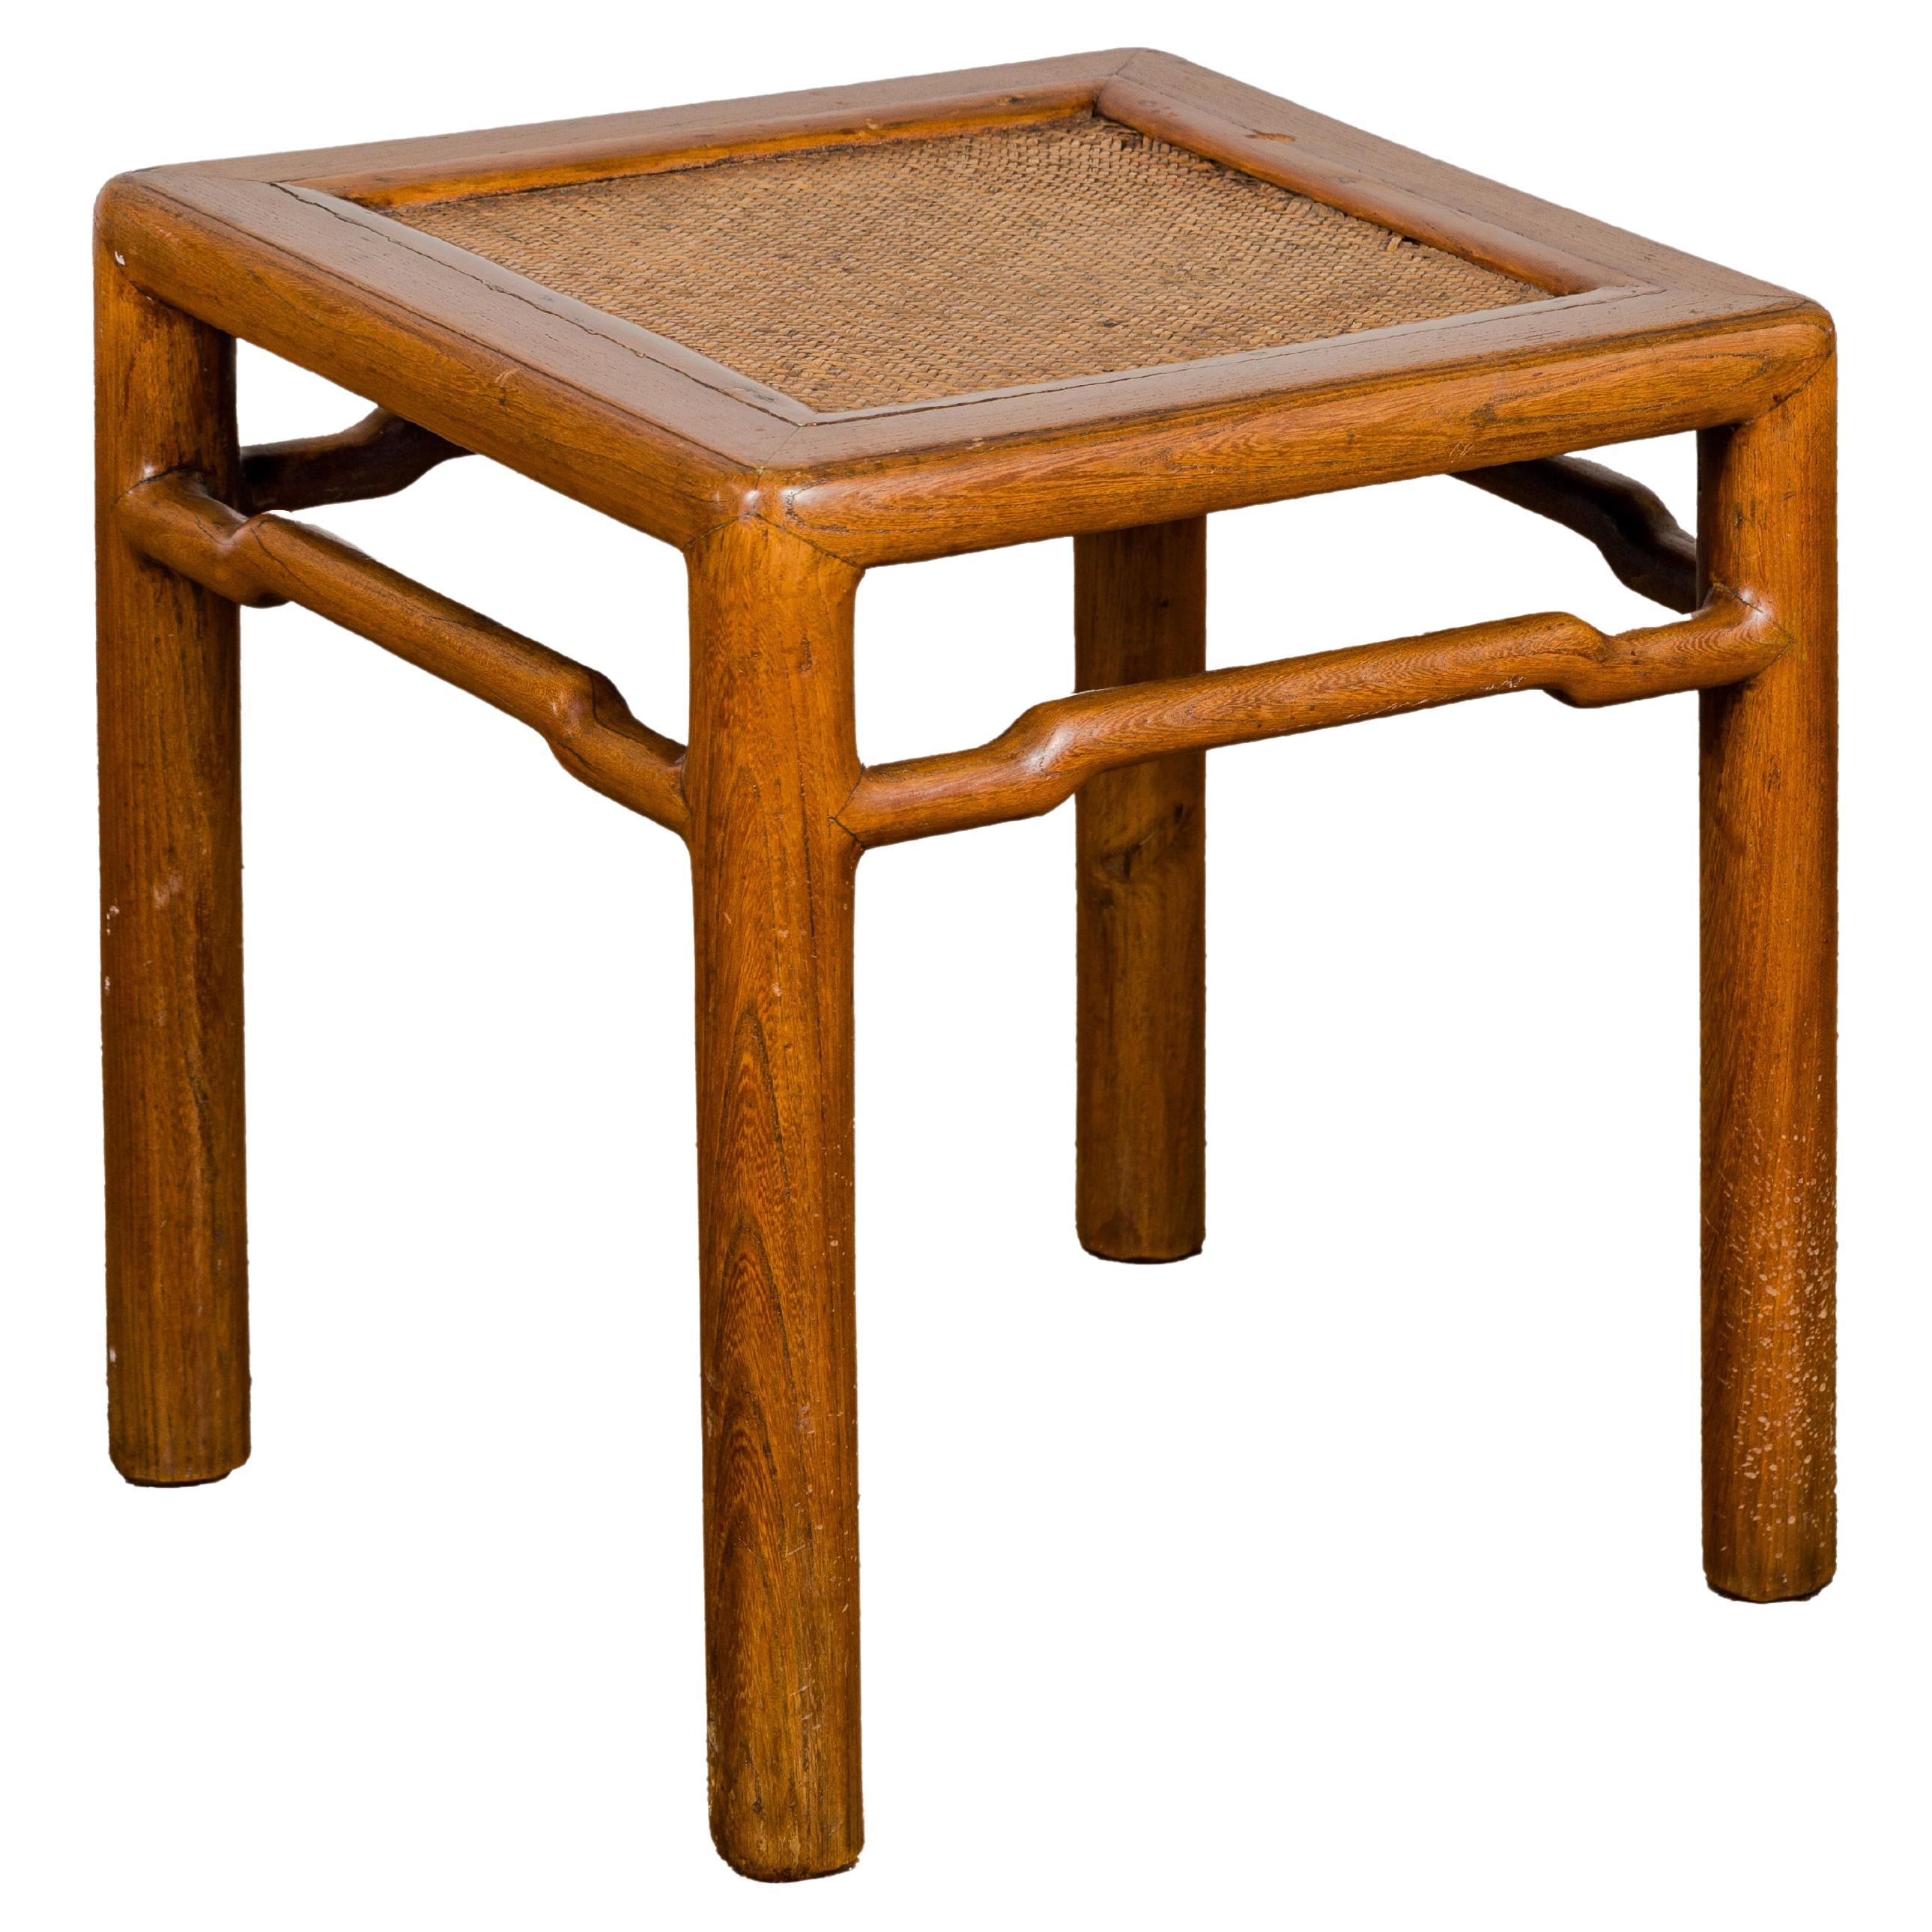 Antique Small Square Side Table with Rattan Insert and Humpback Stretcher For Sale 12